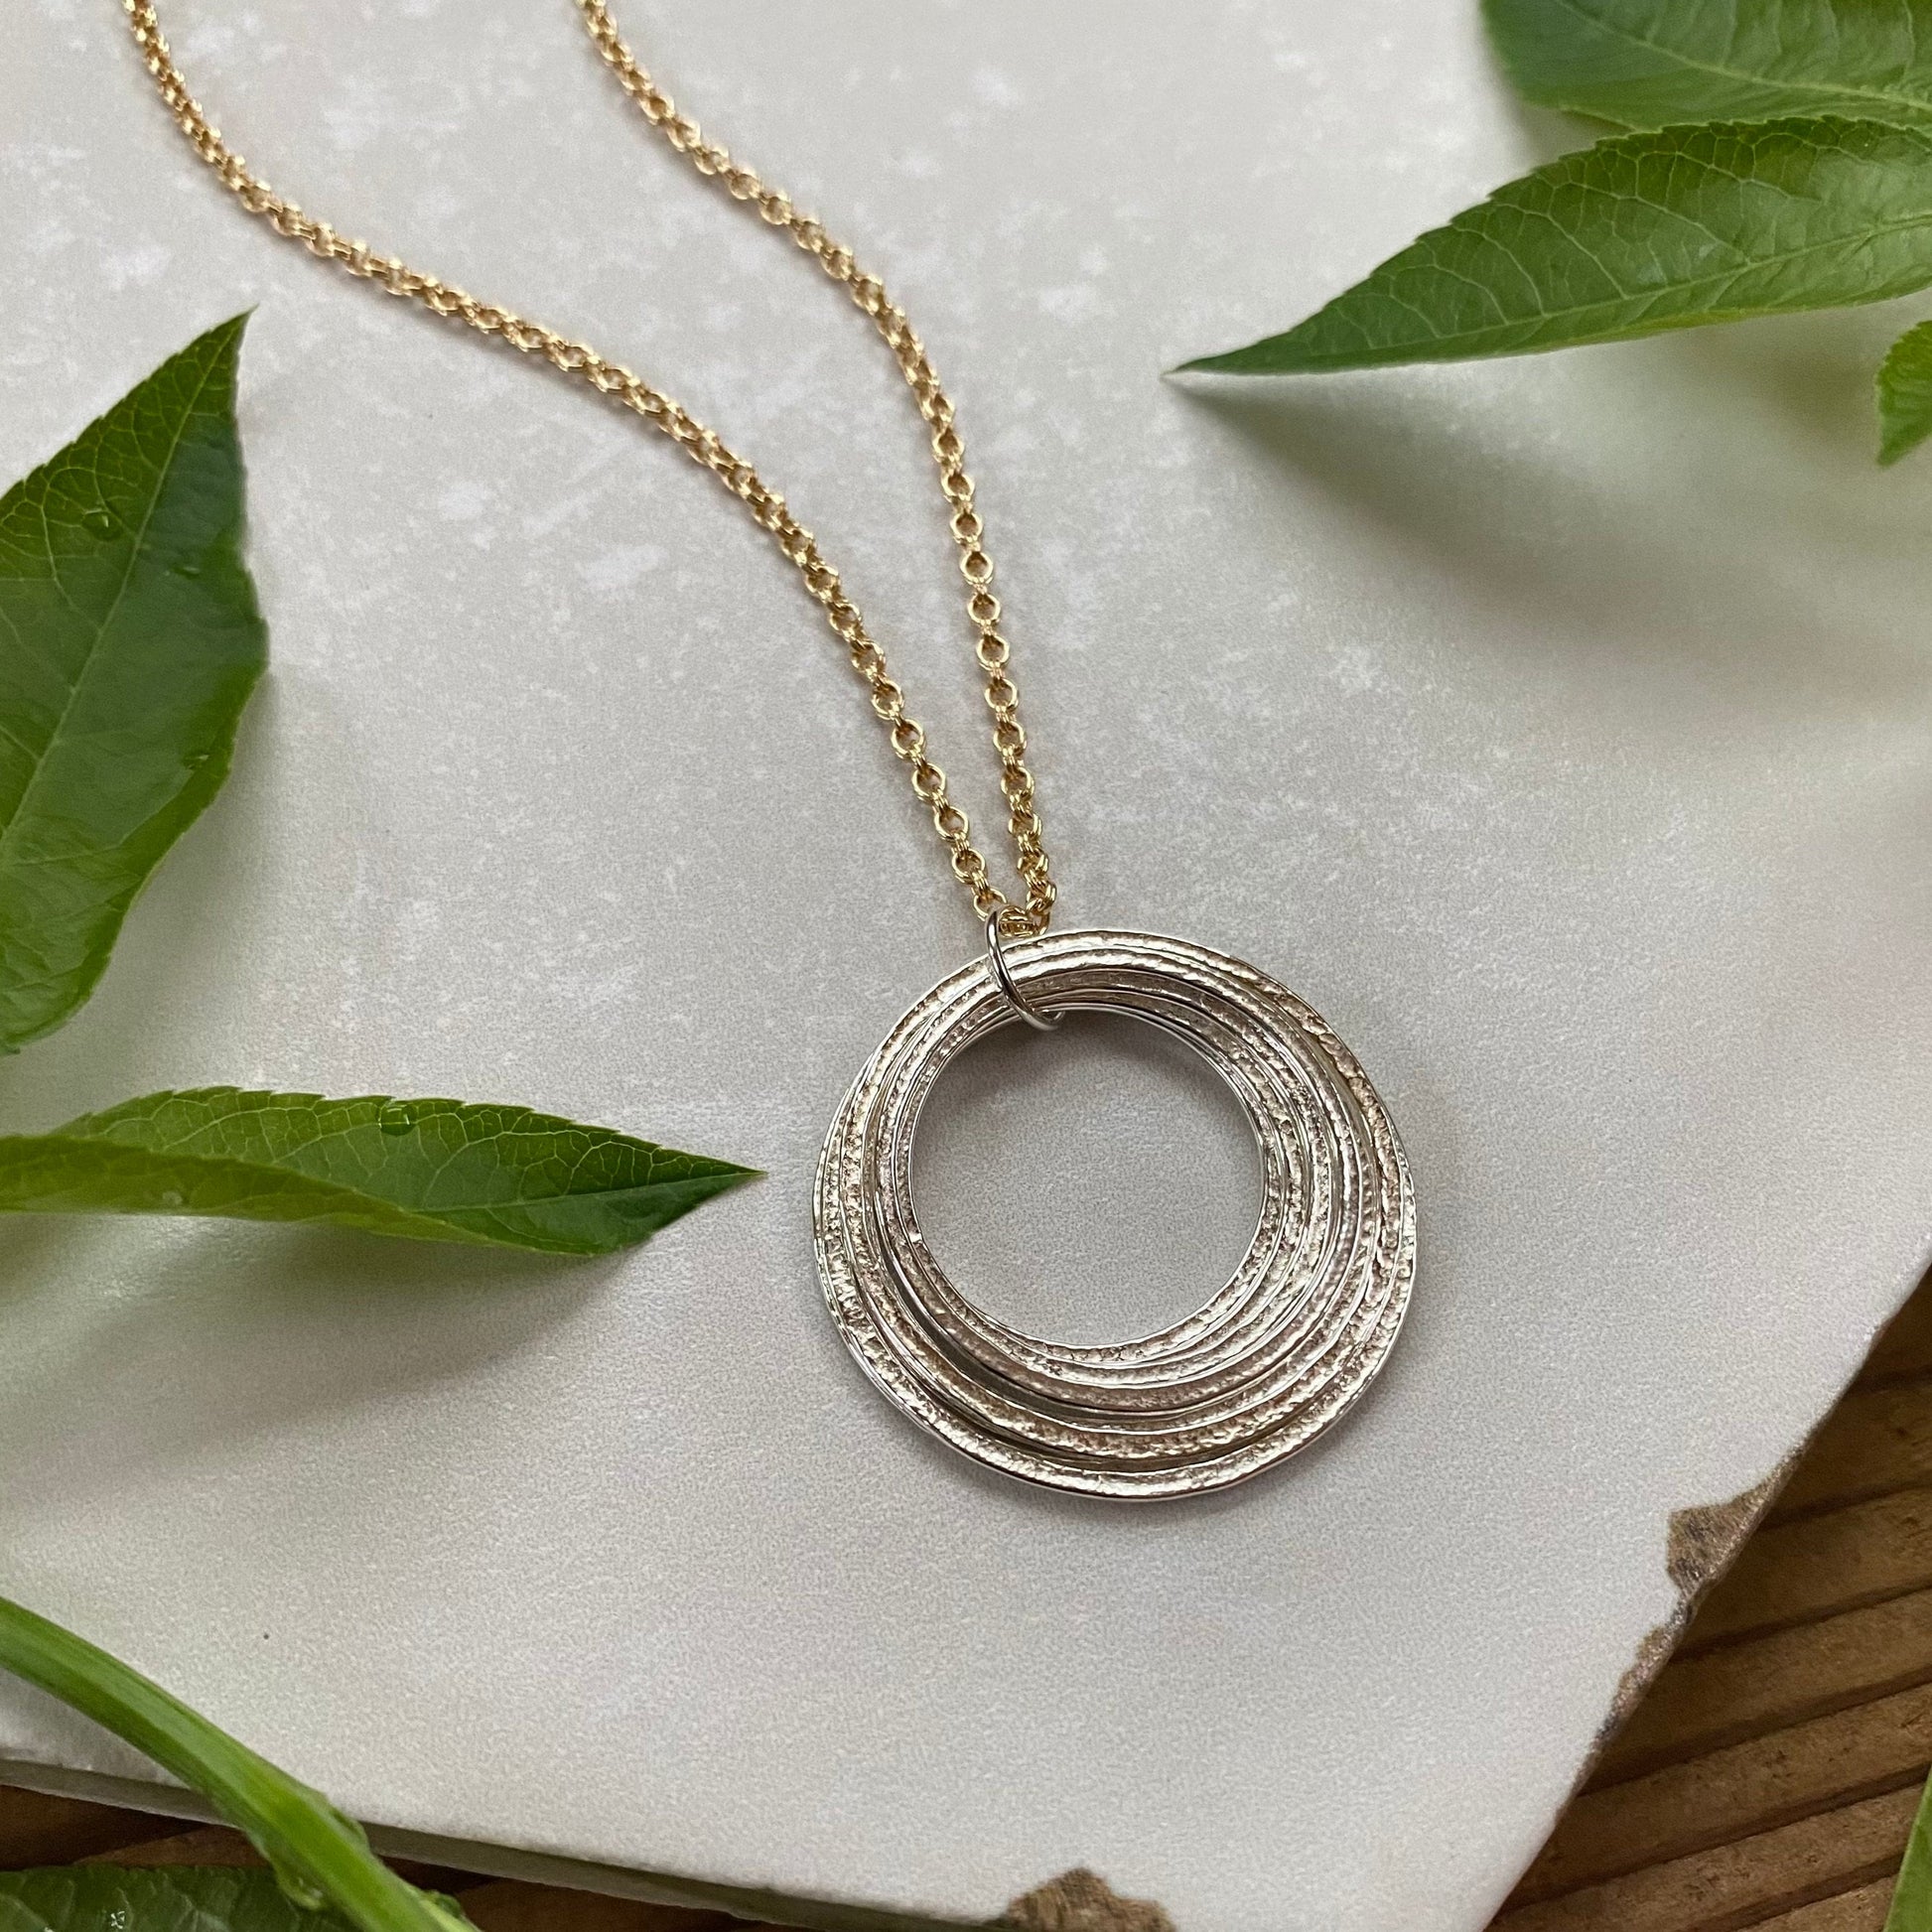 90th Birthday Mixed Metal Nine Circles Necklace - Mid Size, 9 Rings for 9 Decades Milestone Jewelry, Handcrafted Birthday Gift for Woman